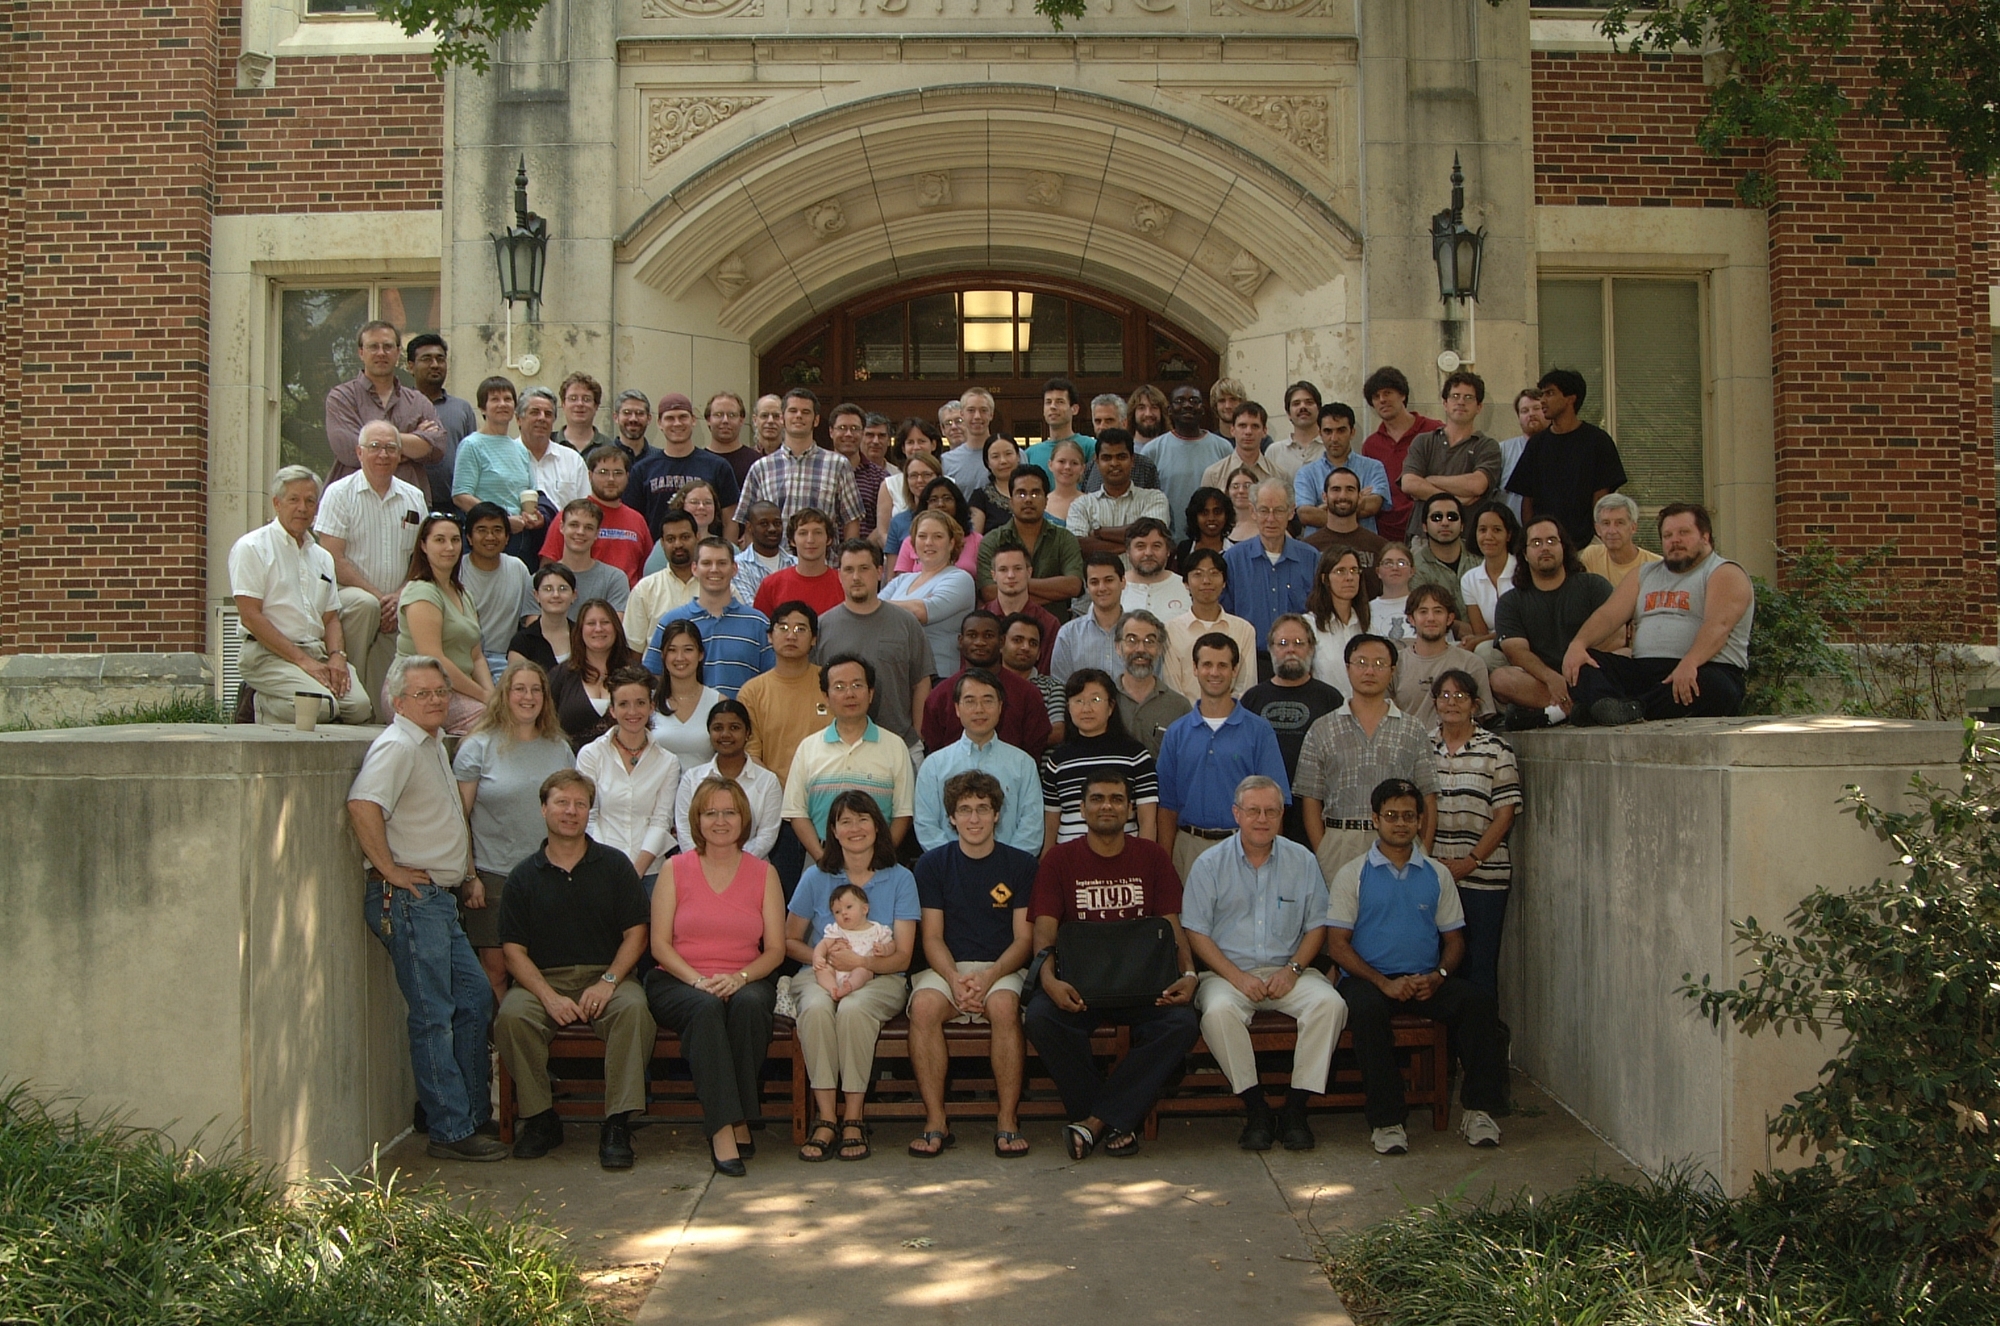 2005-2006 group photo in color.